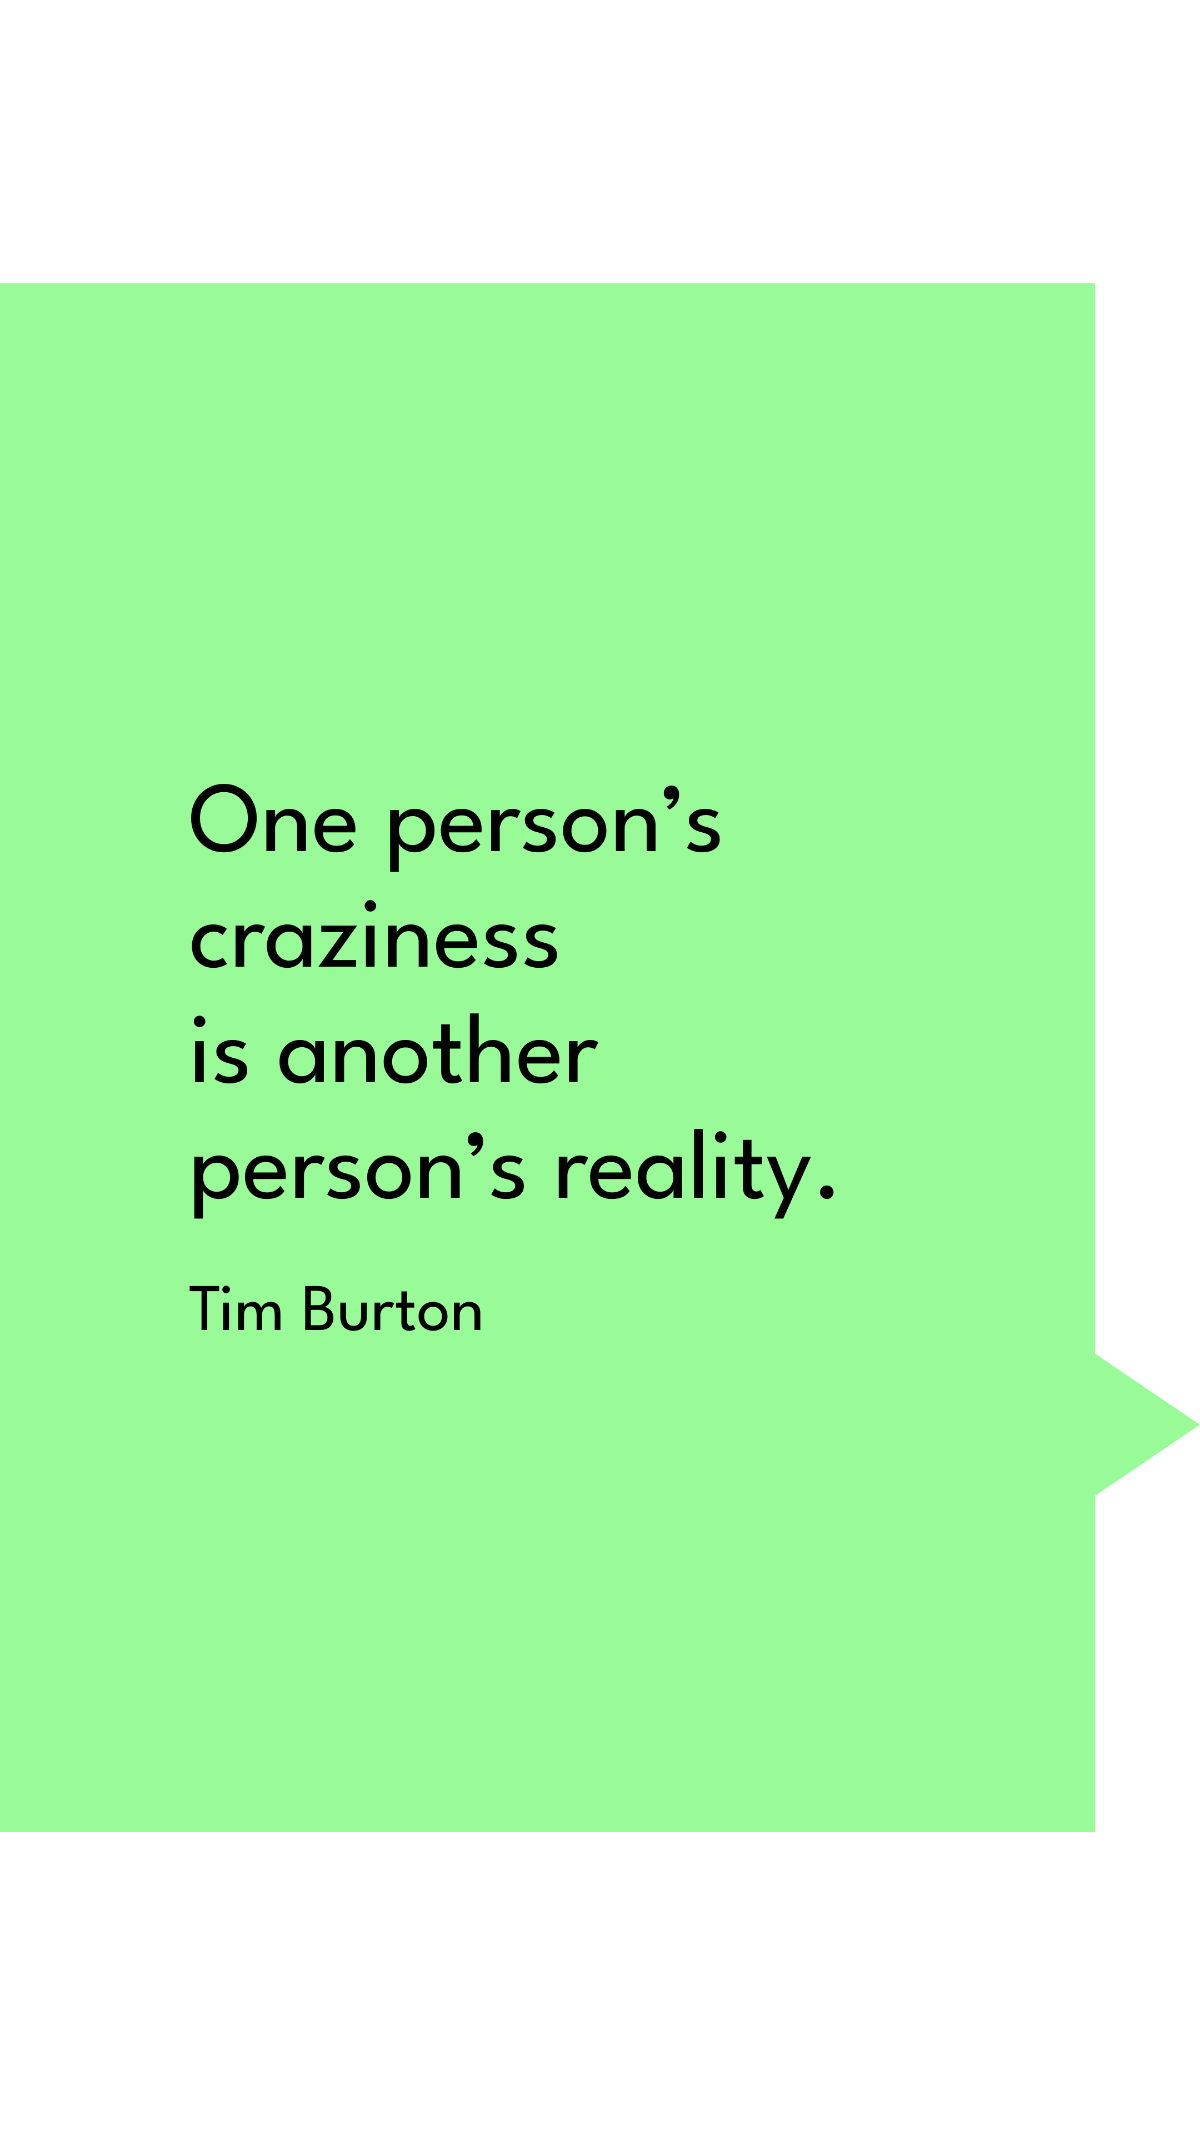 Tim Burton - One person’s craziness is another person’s reality. Template